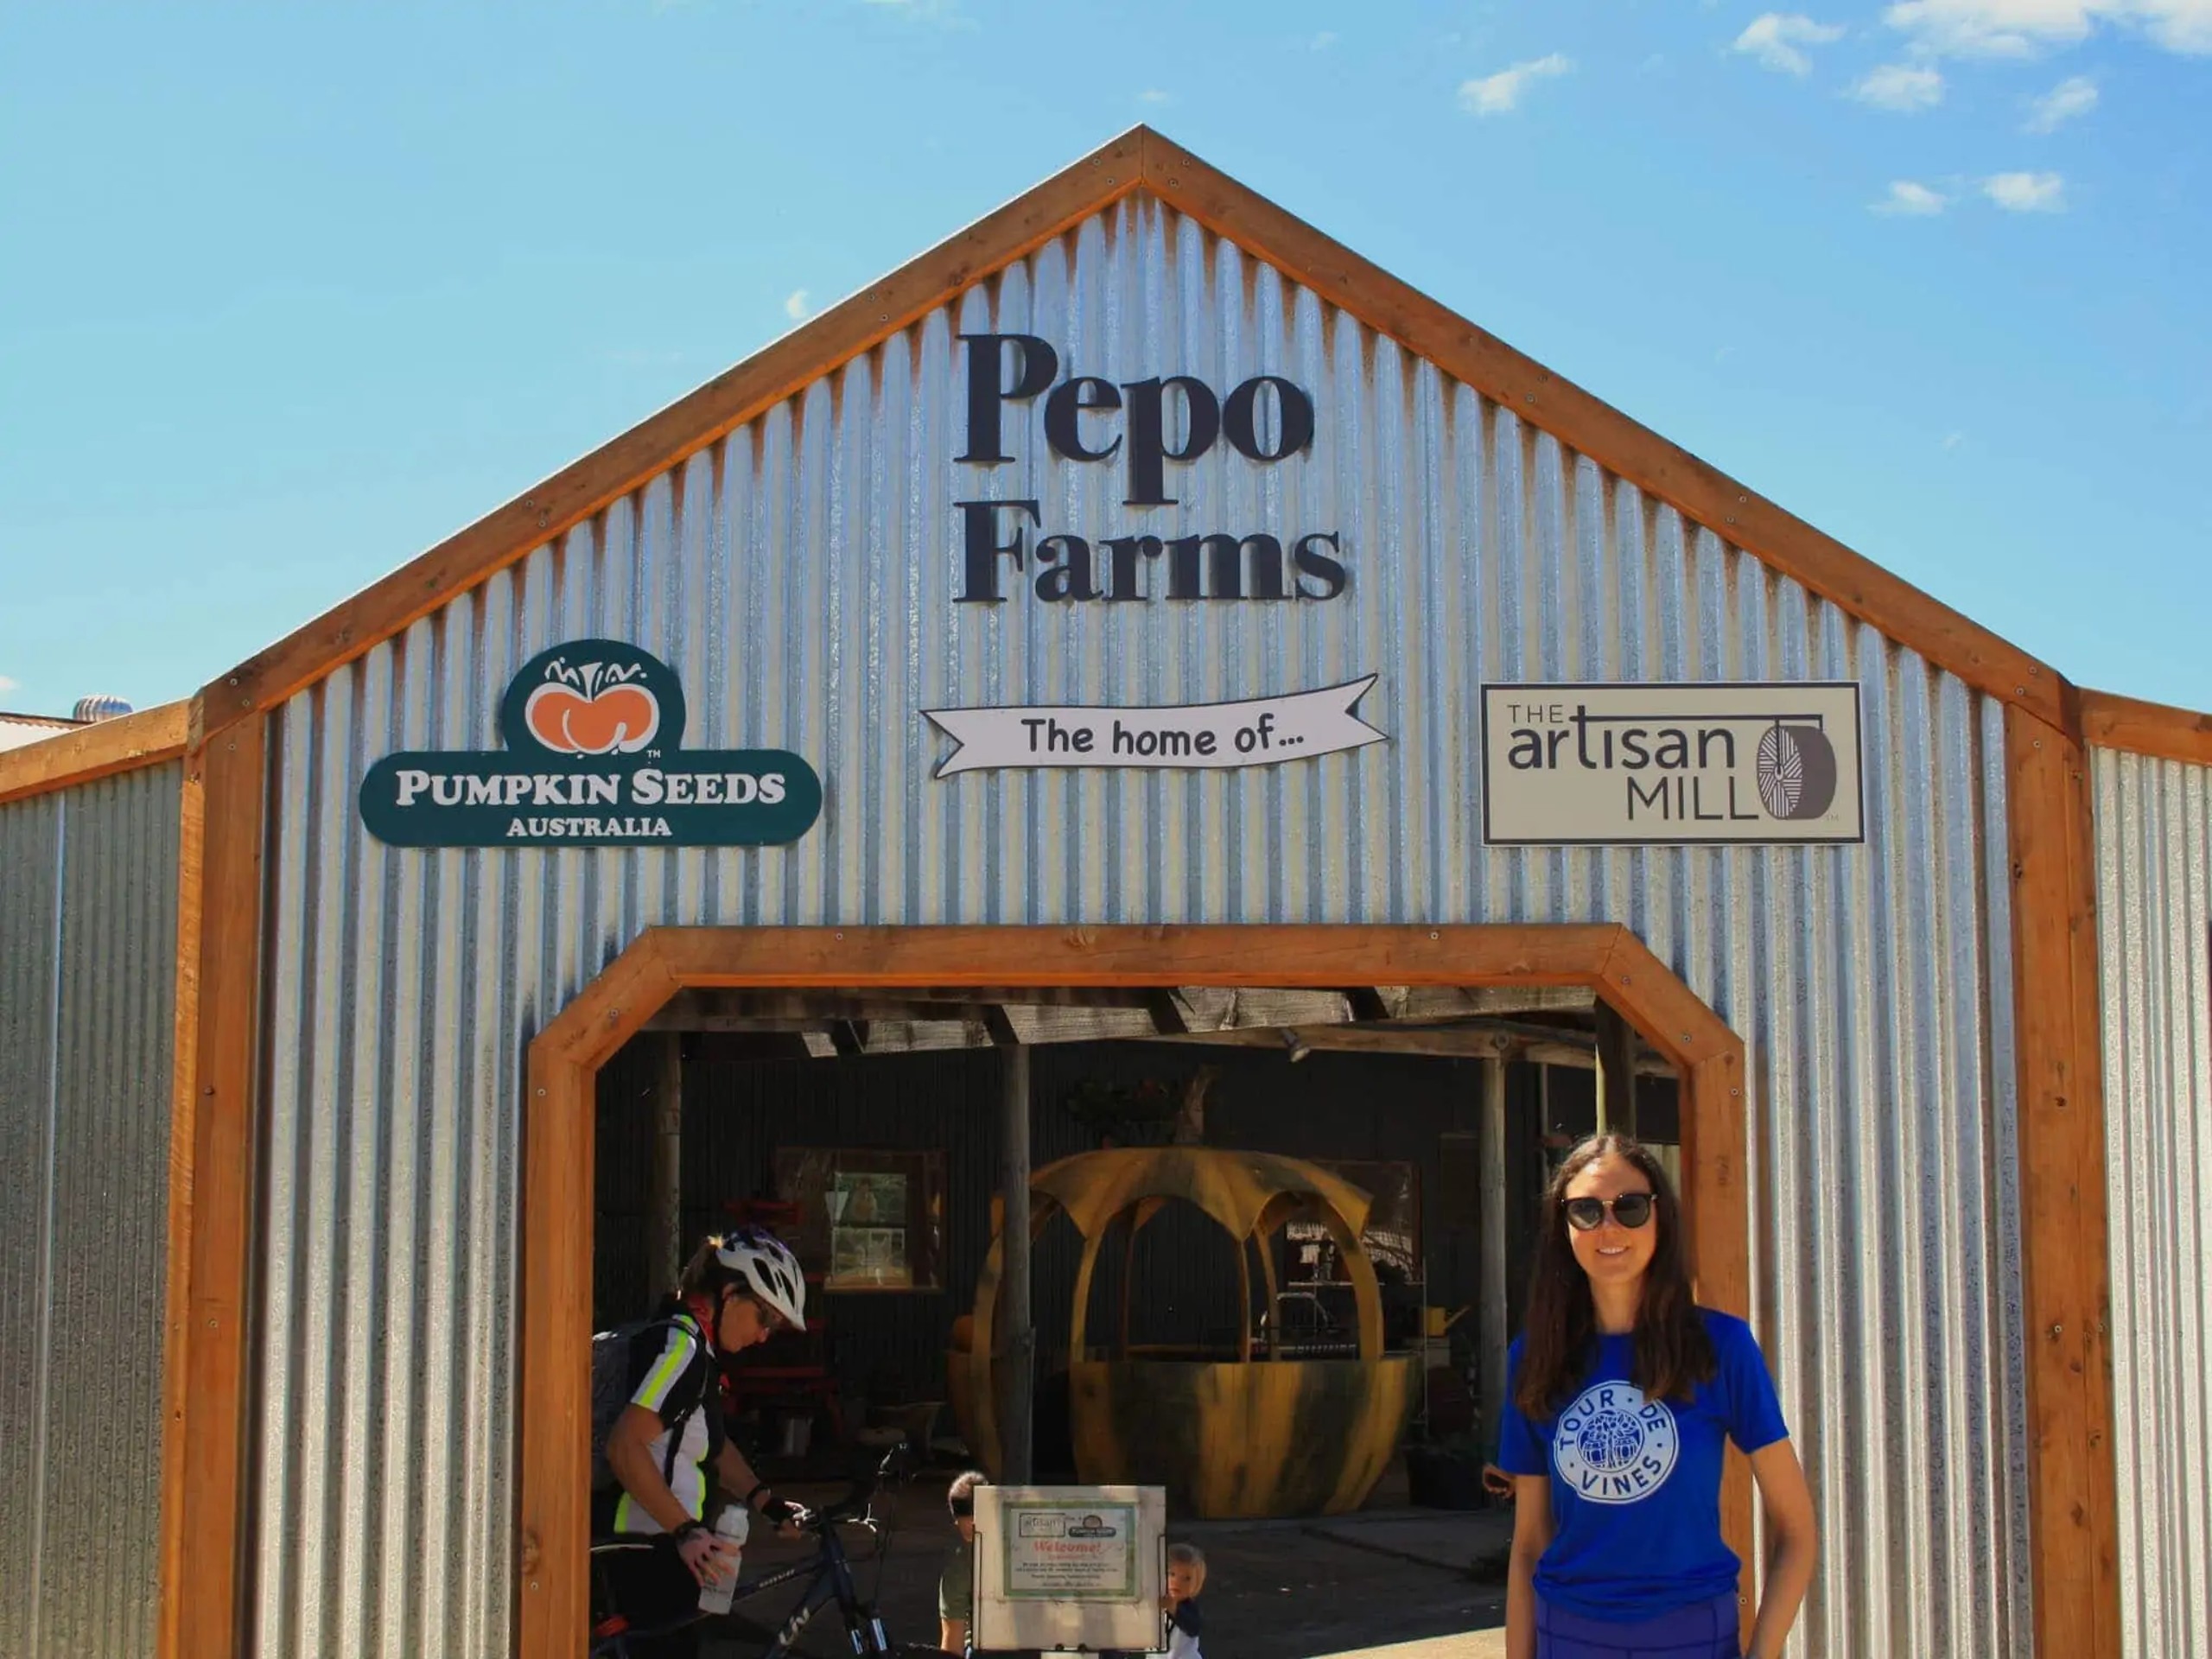 Visiting the Pepo Farm while on a cycling trip